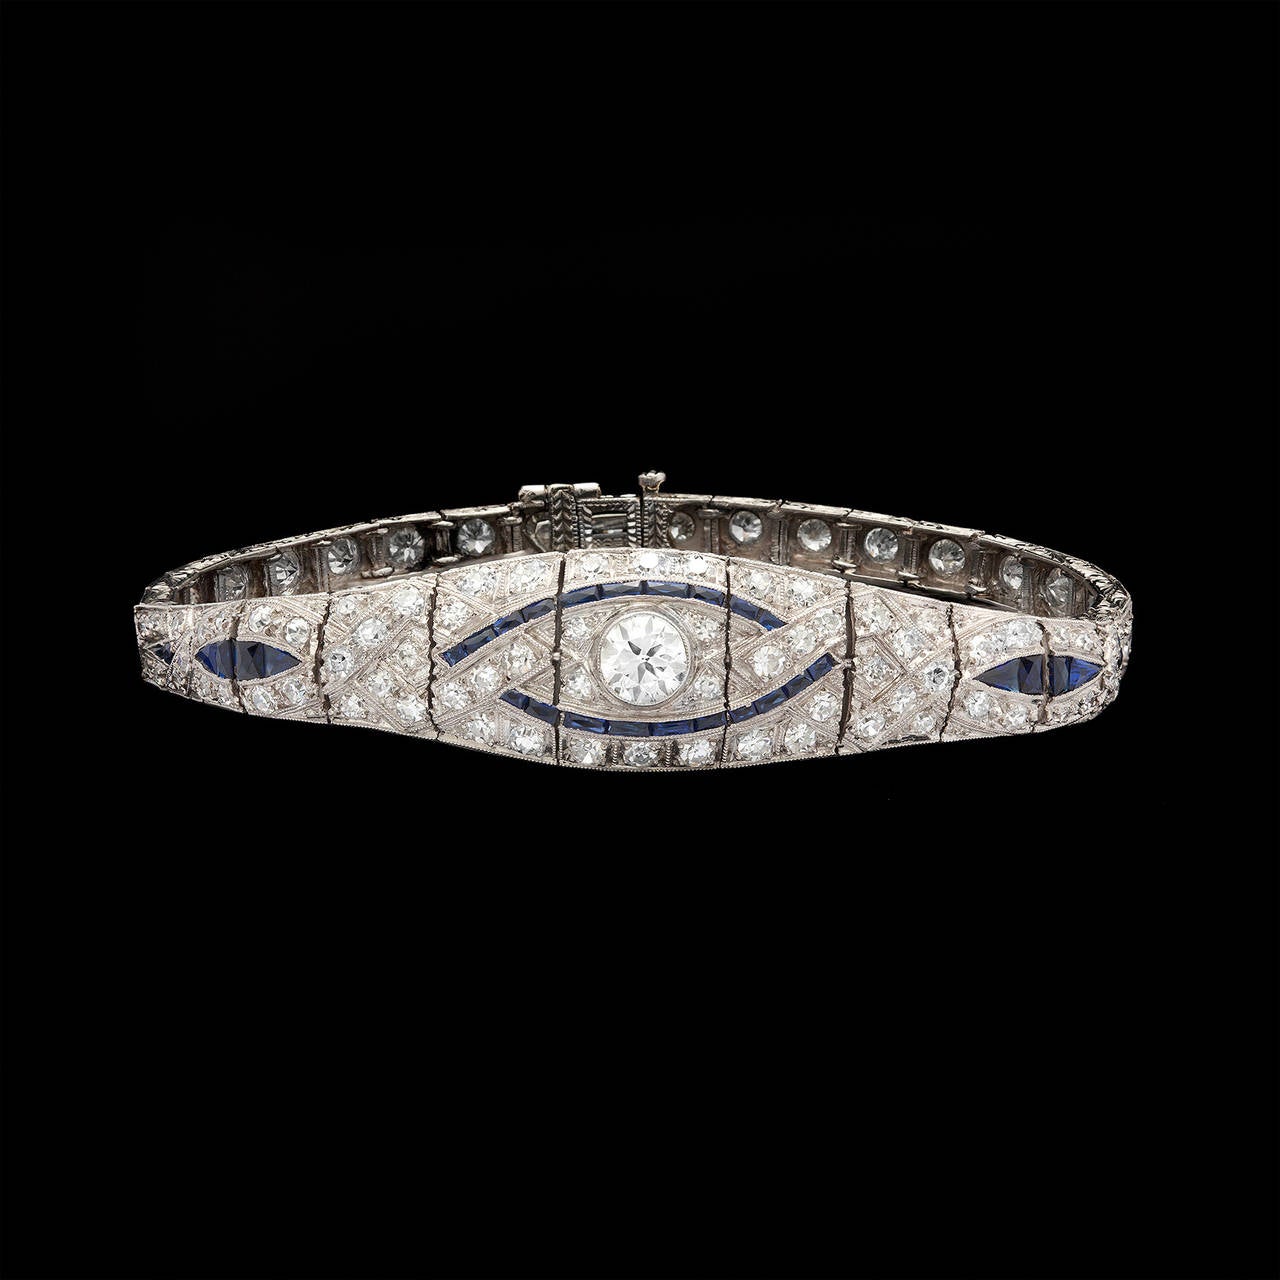 Finely Crafted Art Deco J.E. Caldwell Bracelet with an Intricate Pattern of Diamonds and Blue Sapphires. This piece has a total of 93 diamonds with a total carat weight of 3.60cts, the center stone 0.60ct. The bracelet is 7.25 inches long and